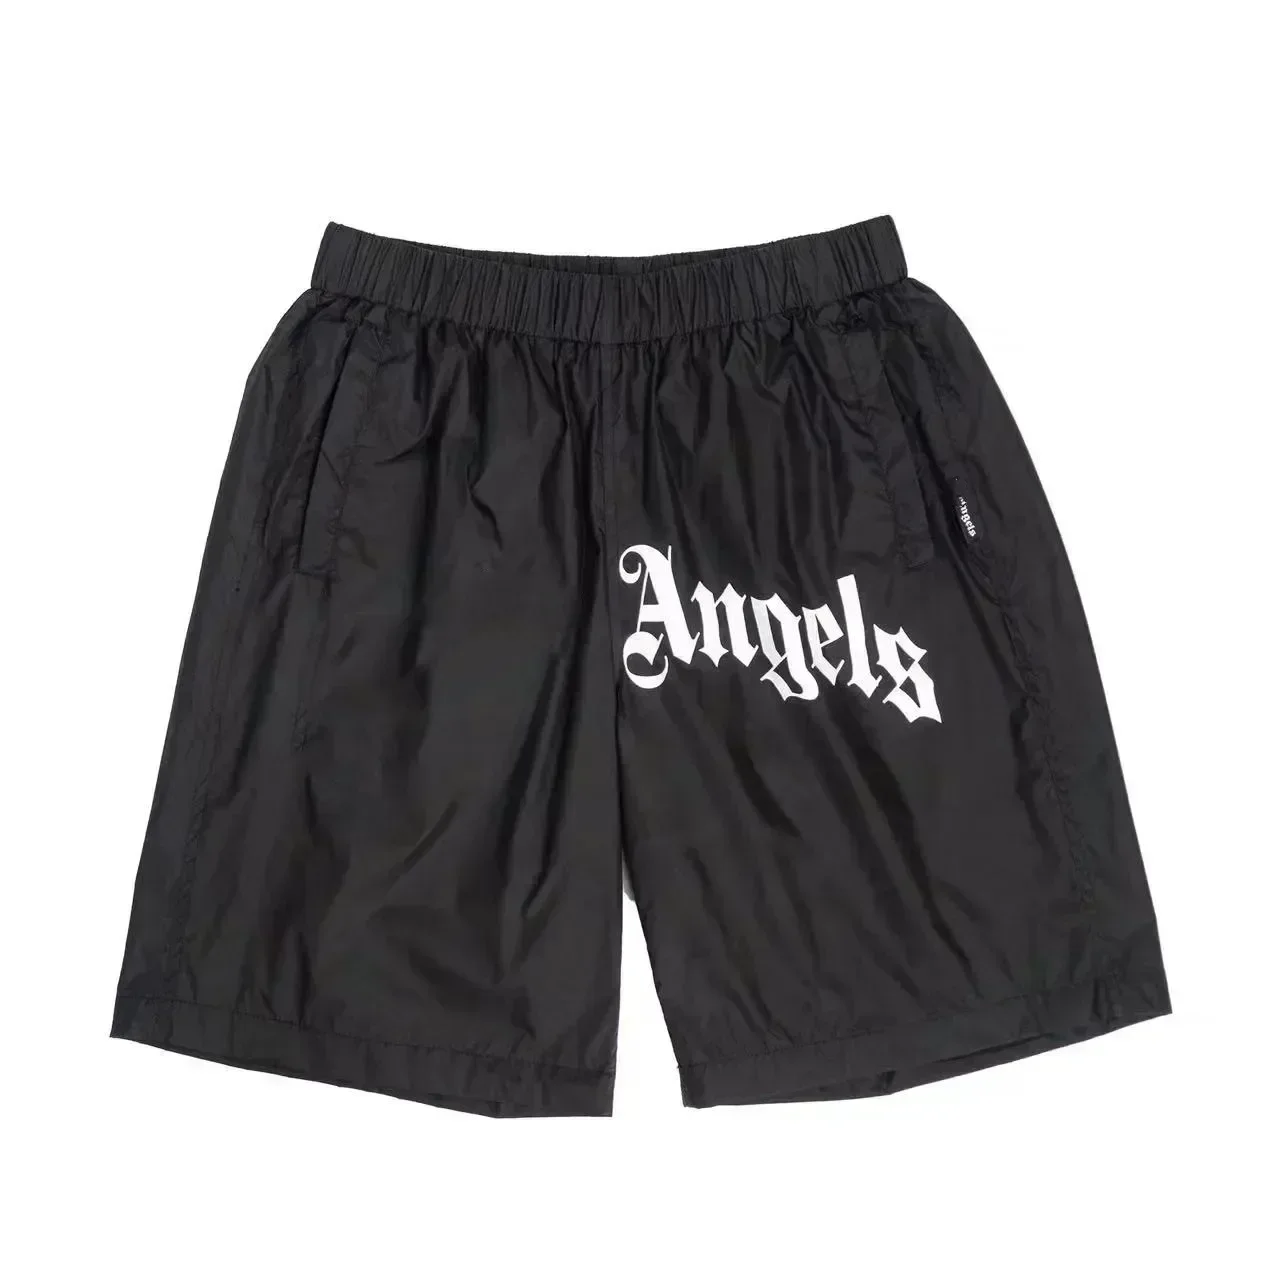 

Angel New Unisex Beach Shorts Men's and Women's Fashion Casual Beach Shorts Couples Cotton shorts Letter Logo Gift